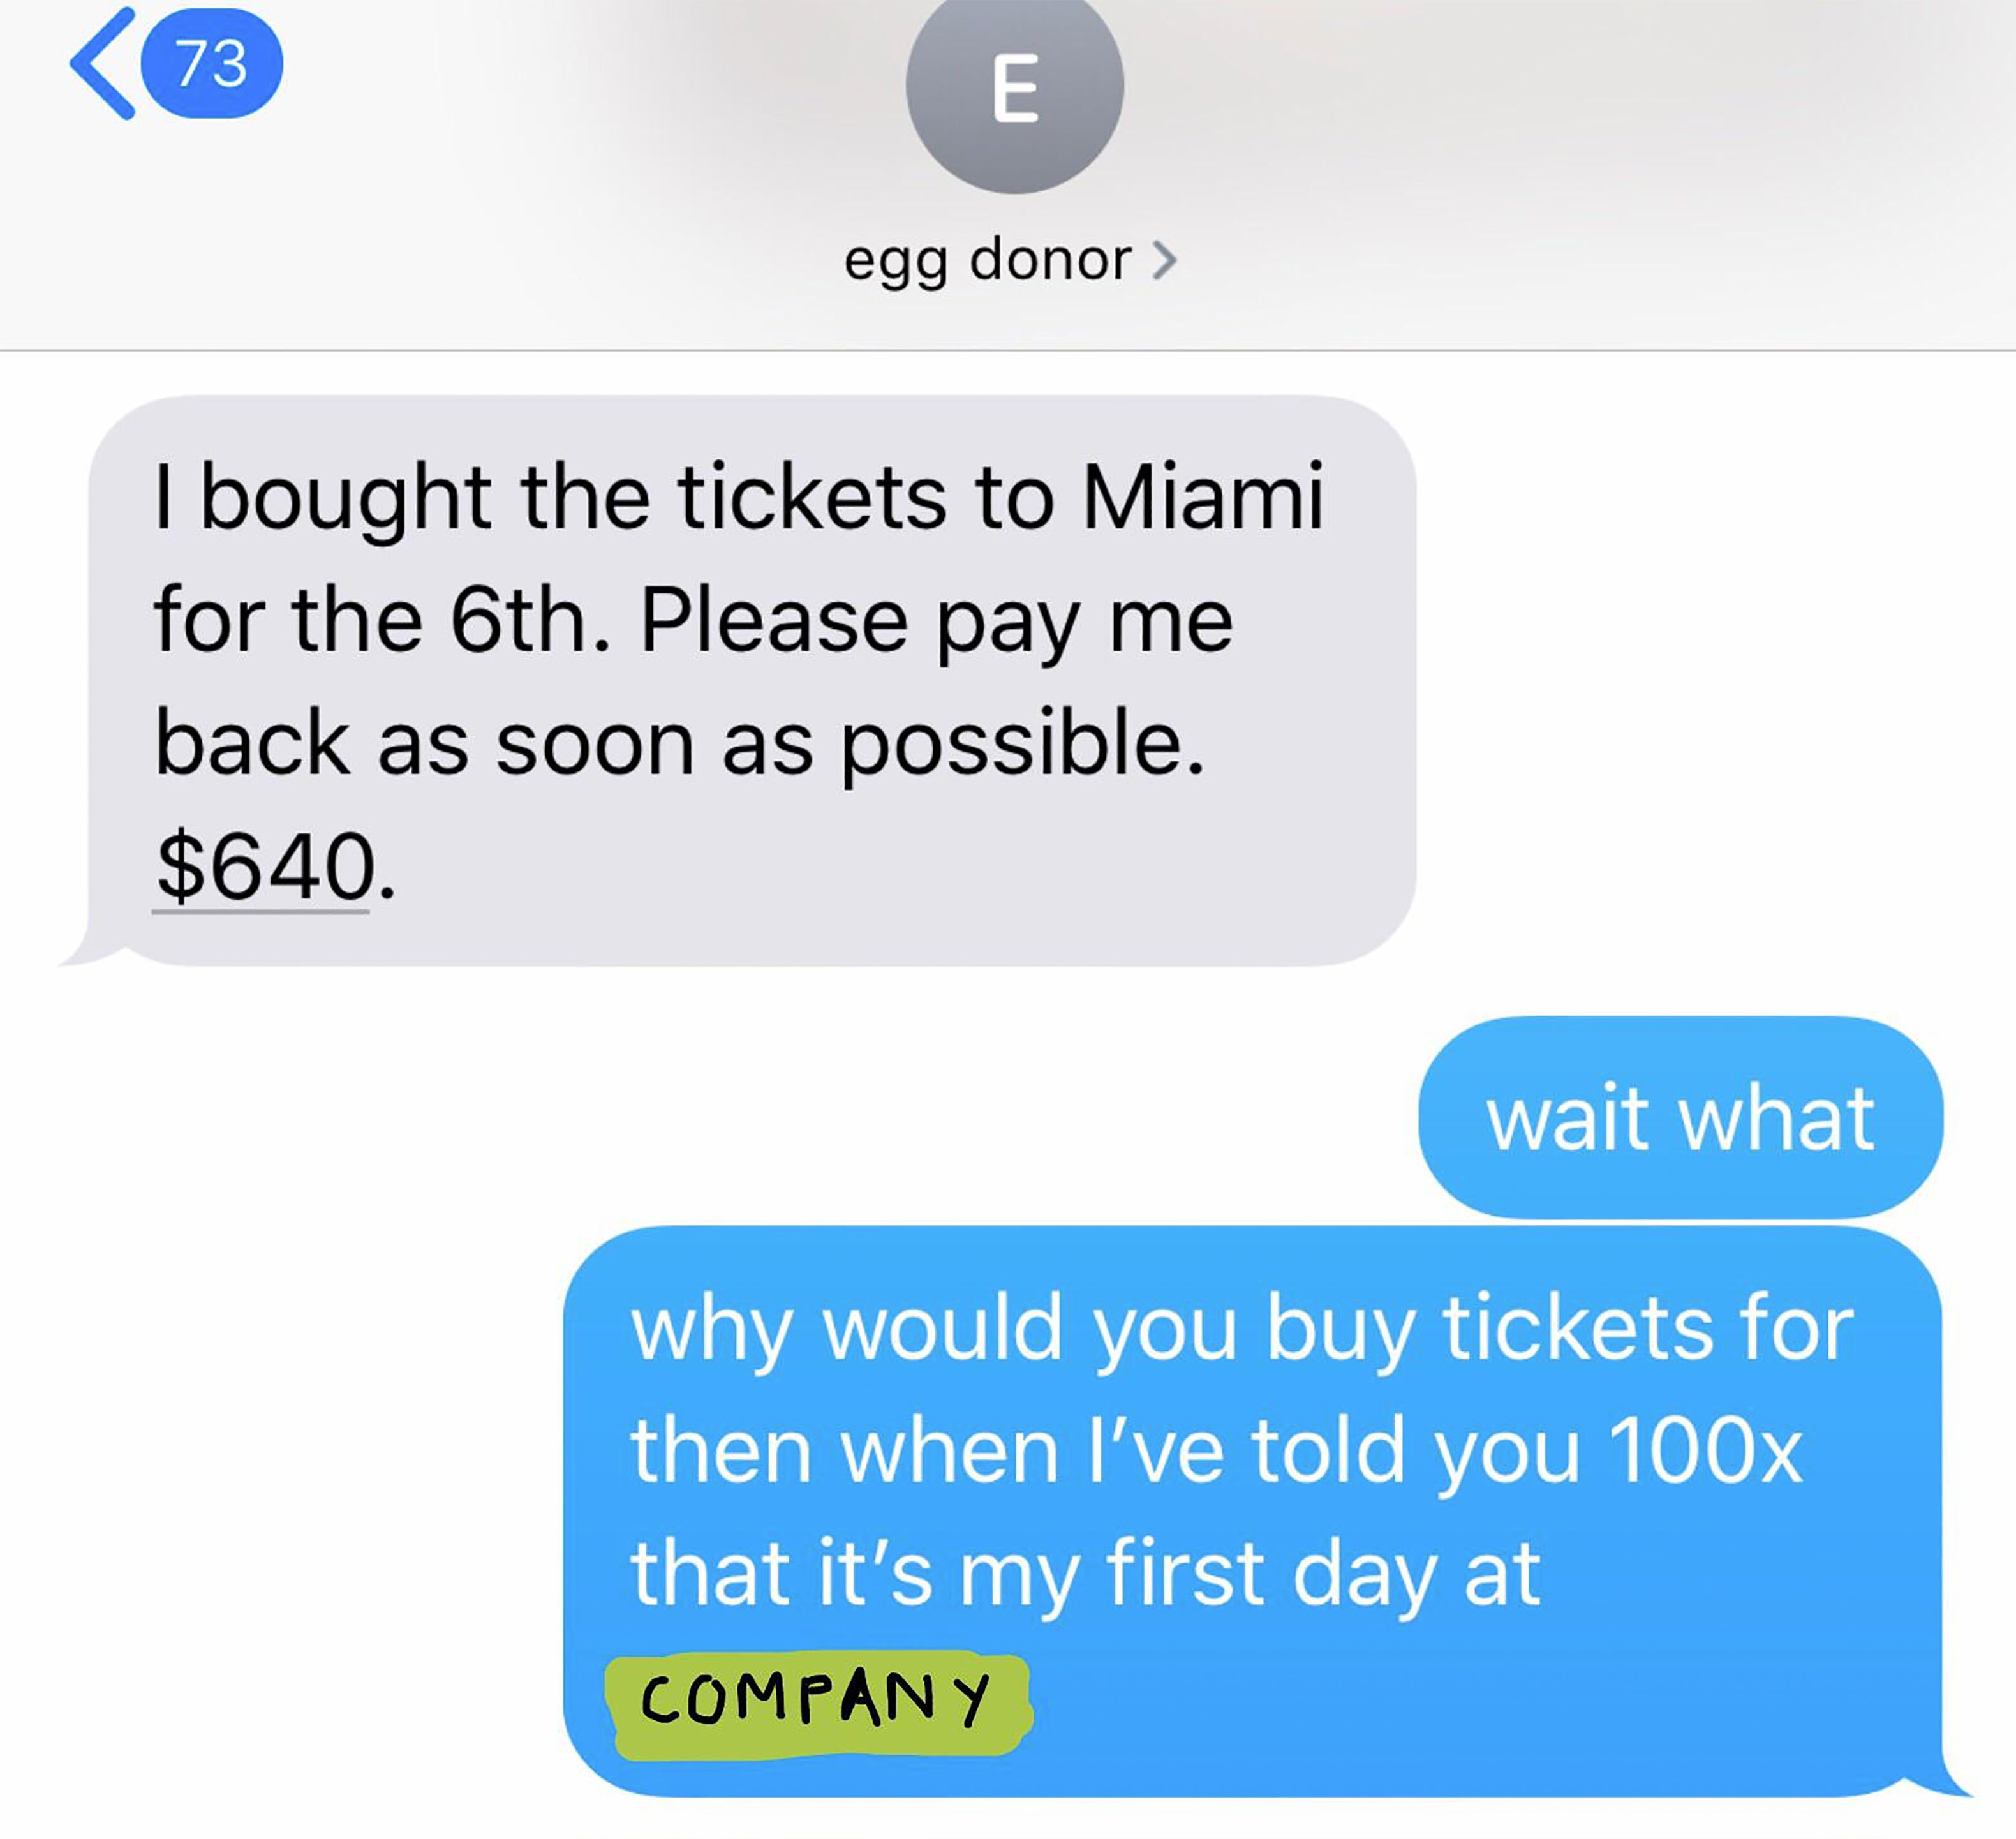 number - 73 egg donor > I bought the tickets to Miami for the 6th. Please pay me back as soon as possible. $640. wait what why would you buy tickets for then when I've told you 100x that it's my first day at Company